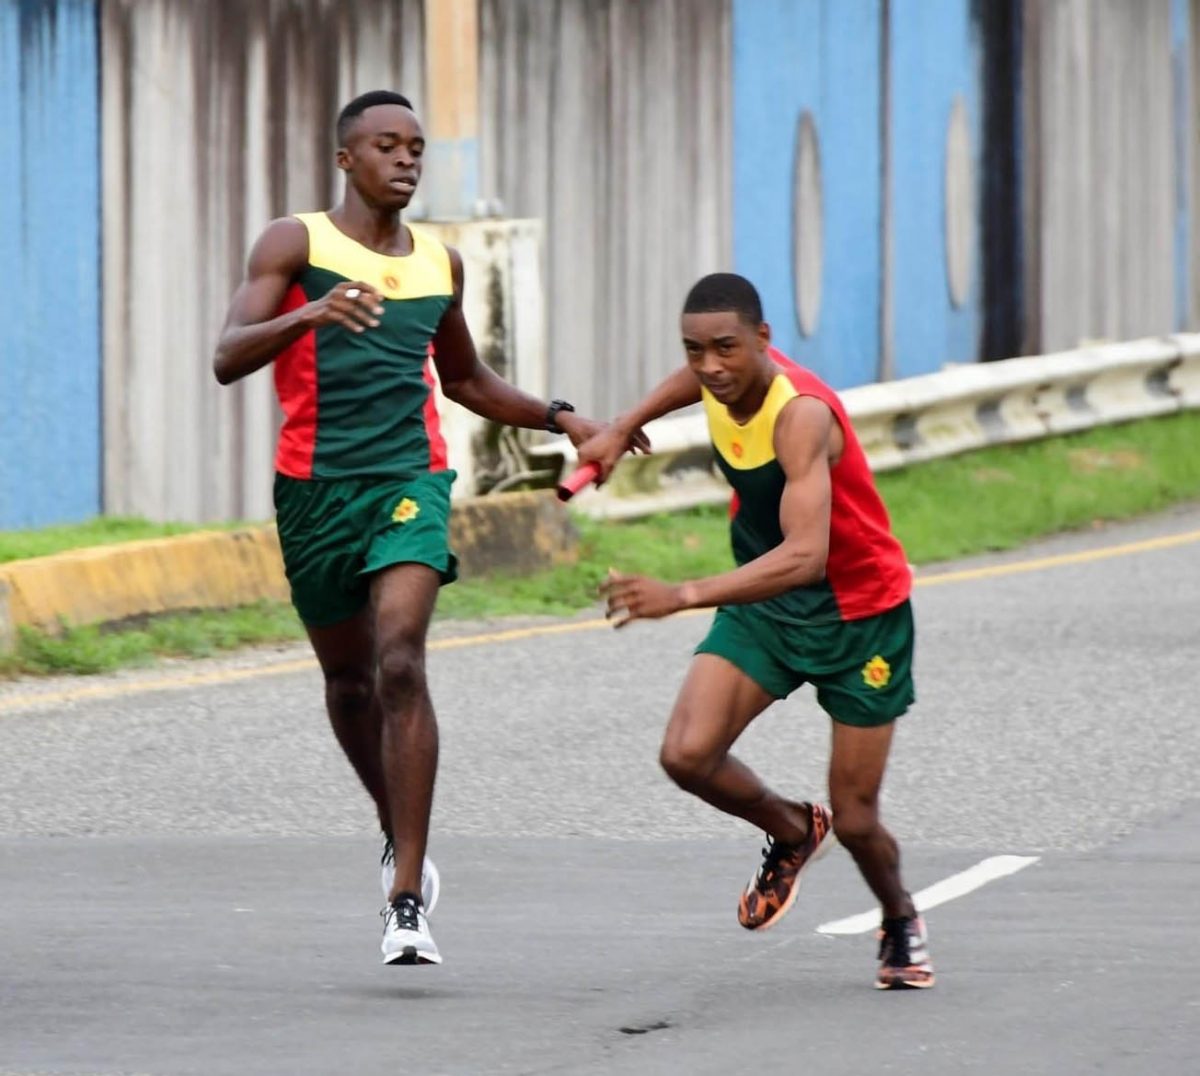 Matthew Gordon passing the baton to Marlon Nicholson on Sunday. The duo was part of the triumphant Guyana Defence Force (GDF) team which once again ran away with the first place trophy of the Inter-Services road relay event.
